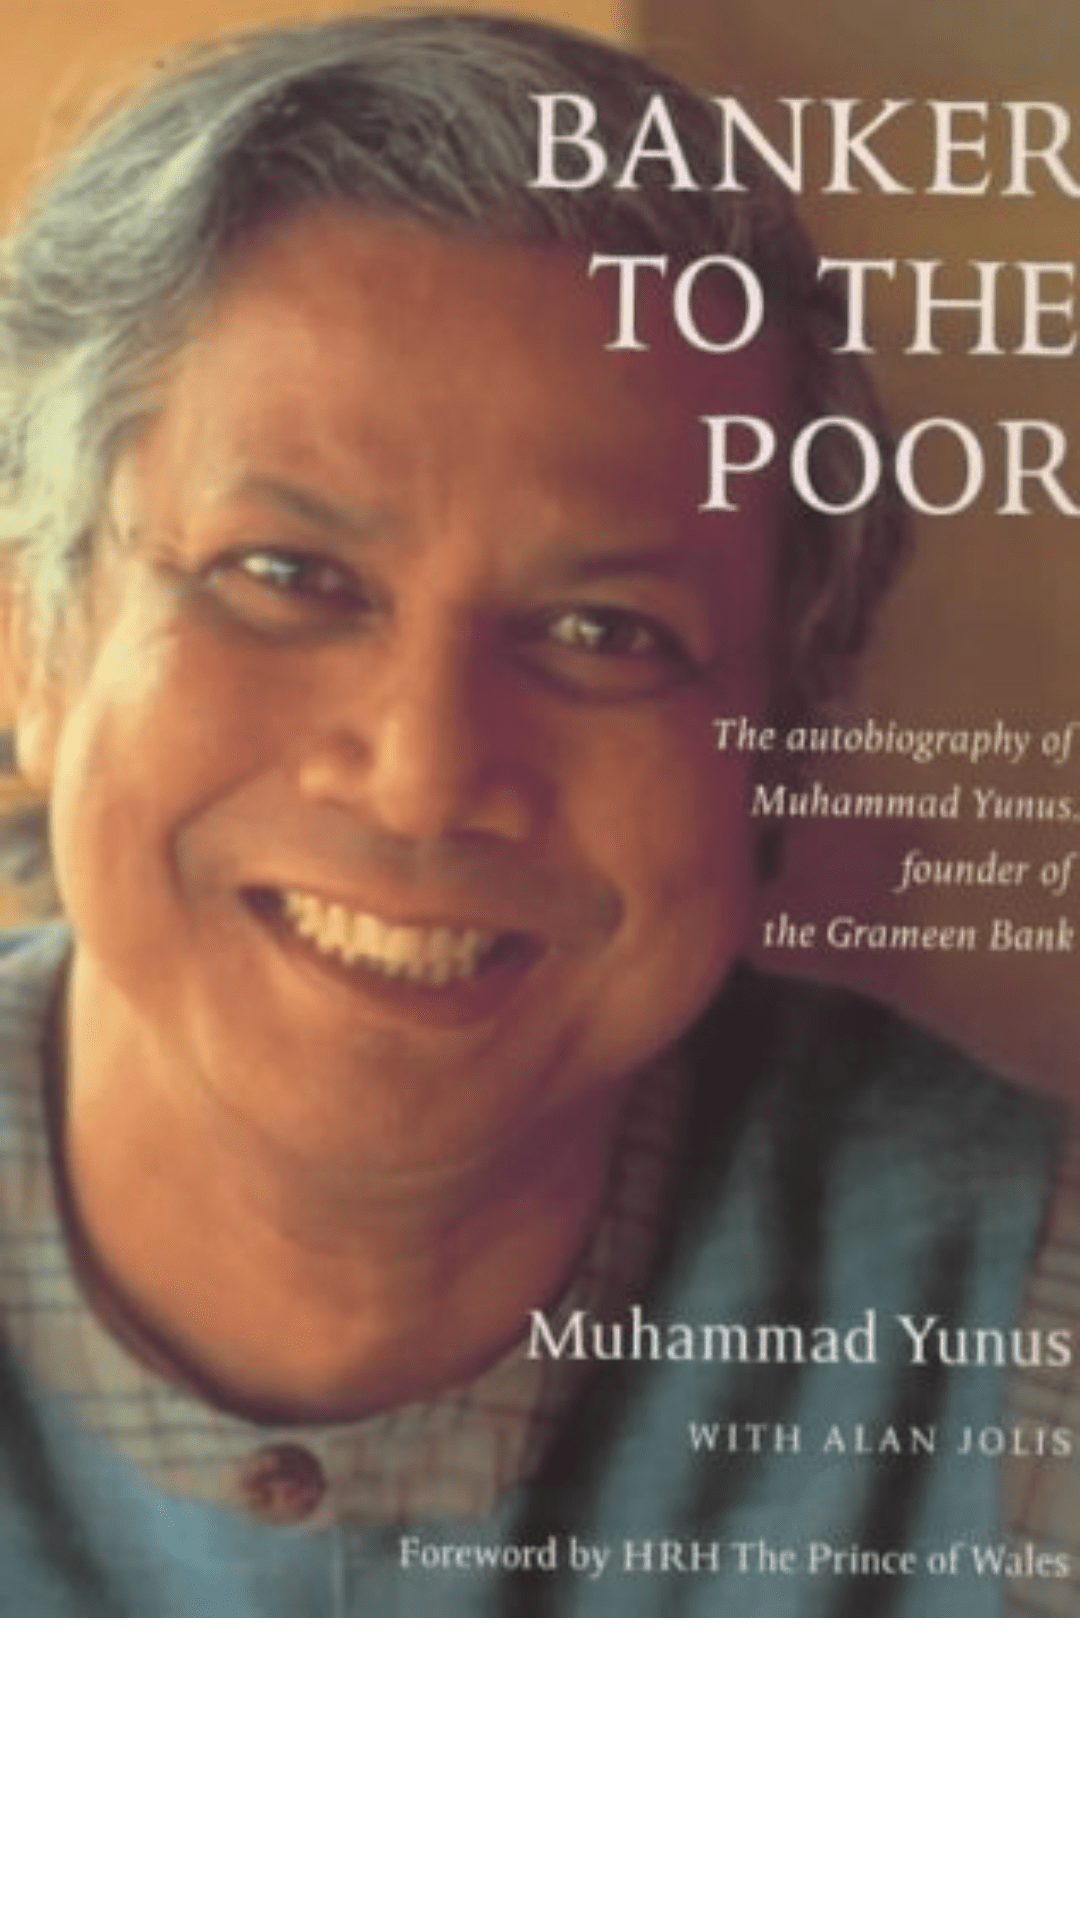 Banker to the Poor : The Autobiography of Muhammad Yunus, Founder of the Grameen Bank